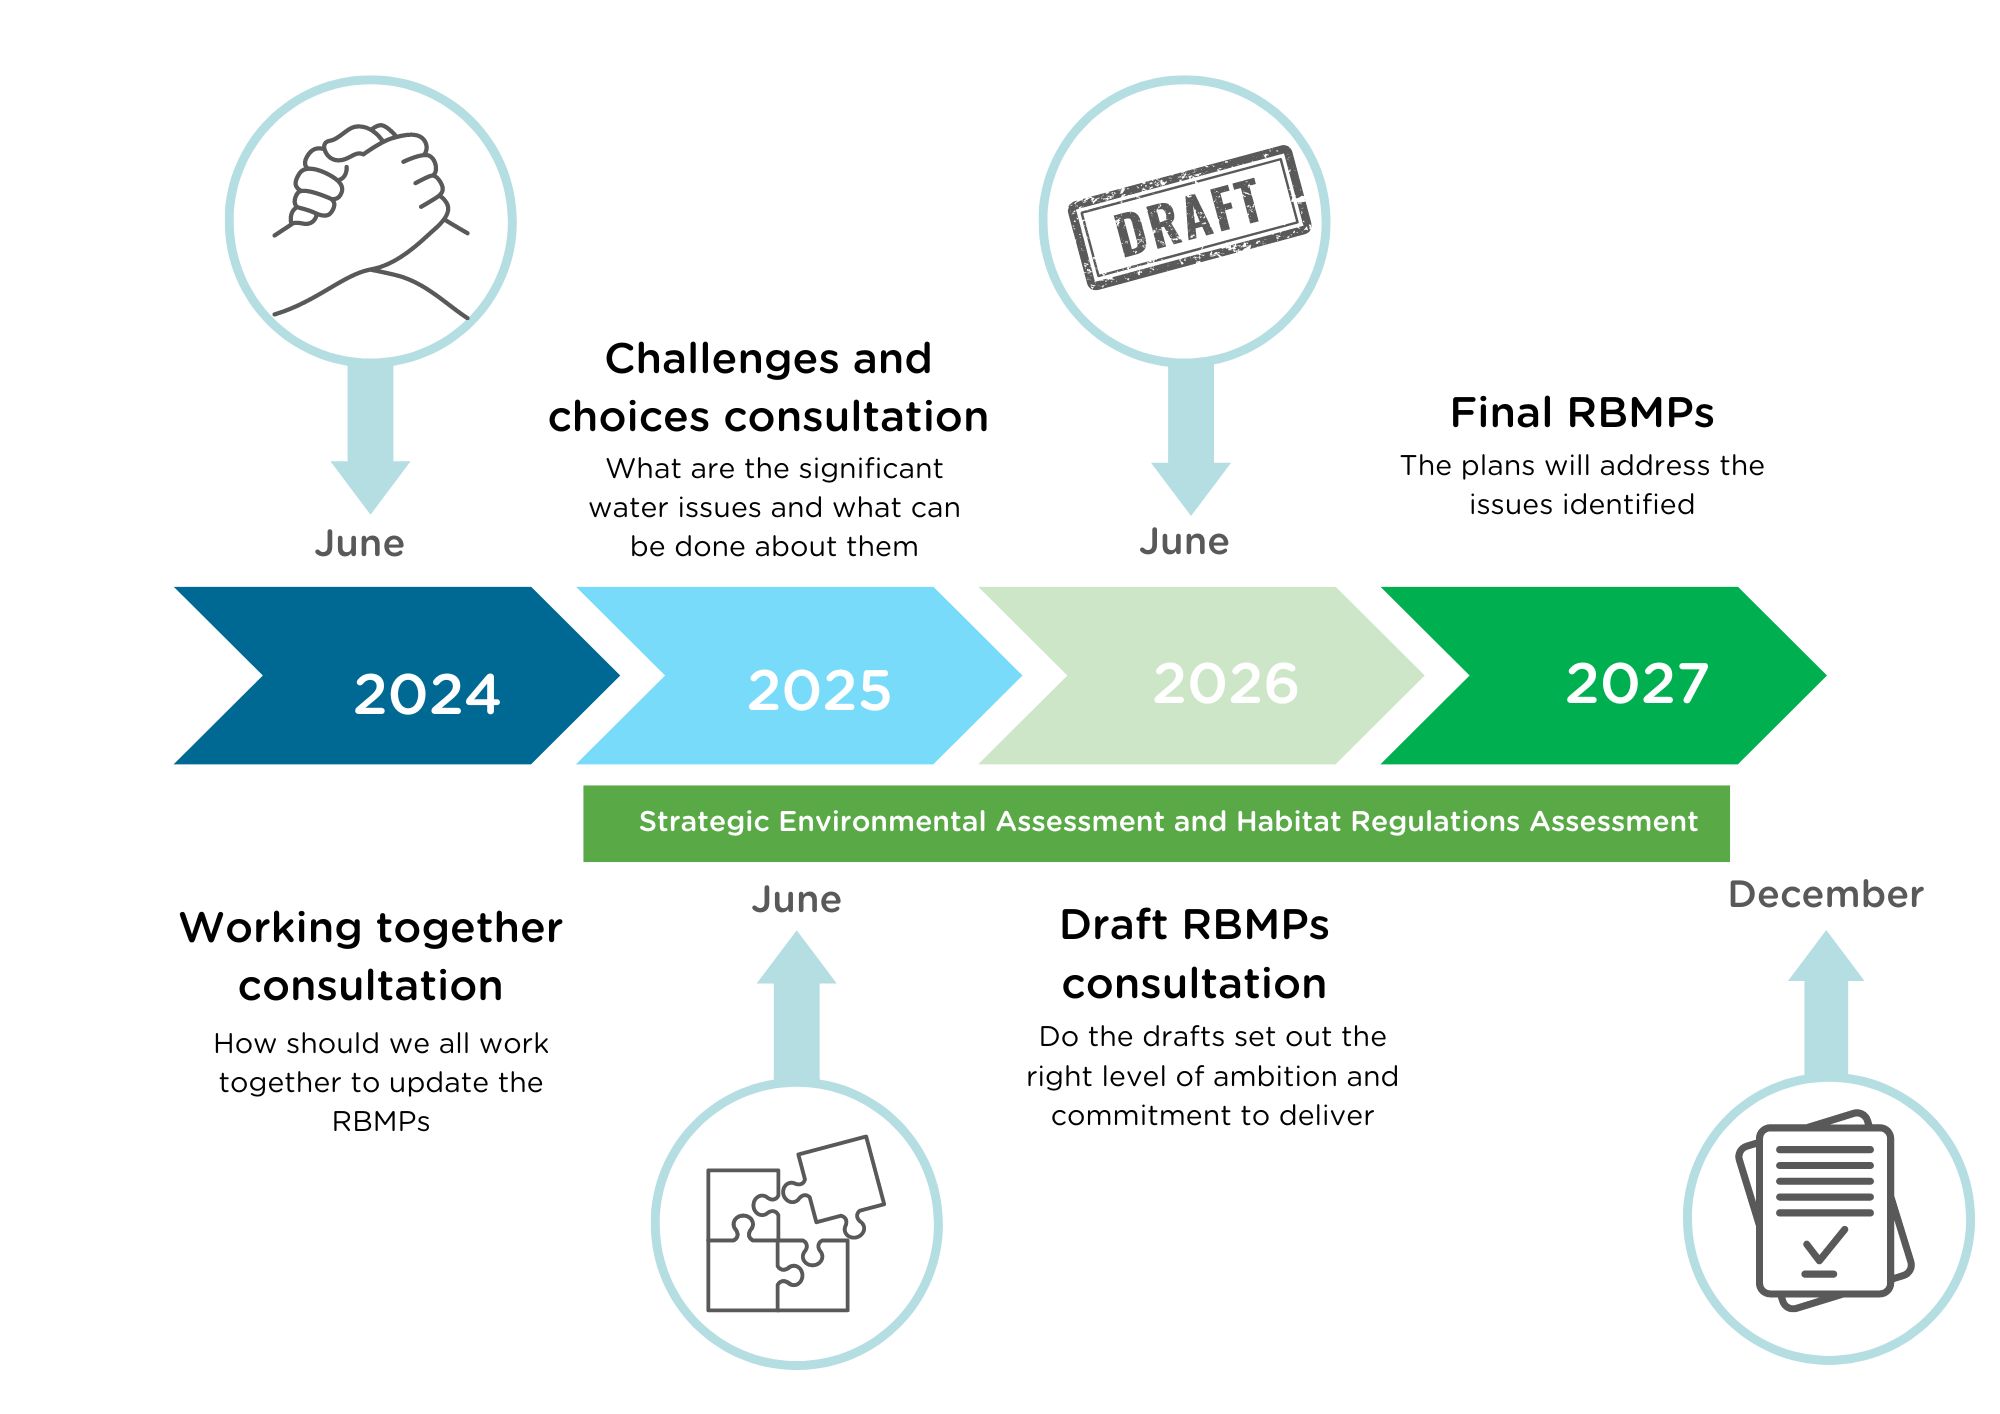 A picture showing a timeline from 2024 to 2027 showing the steps required to update RBMPs